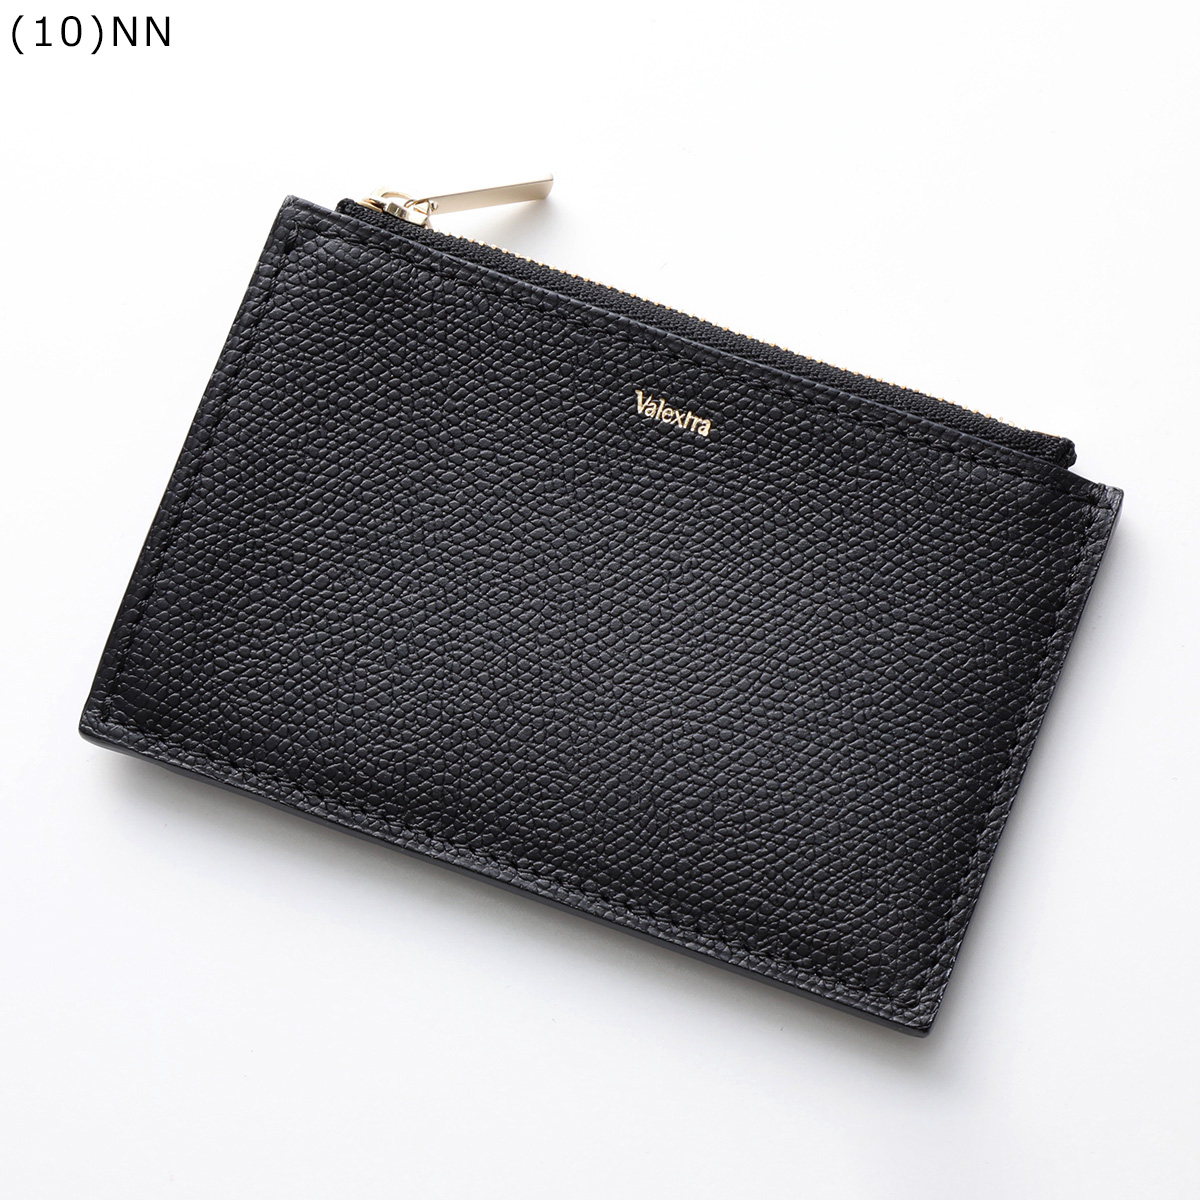 Valextra フラグメントケース 3cc and coin wallet SGNL0009028...